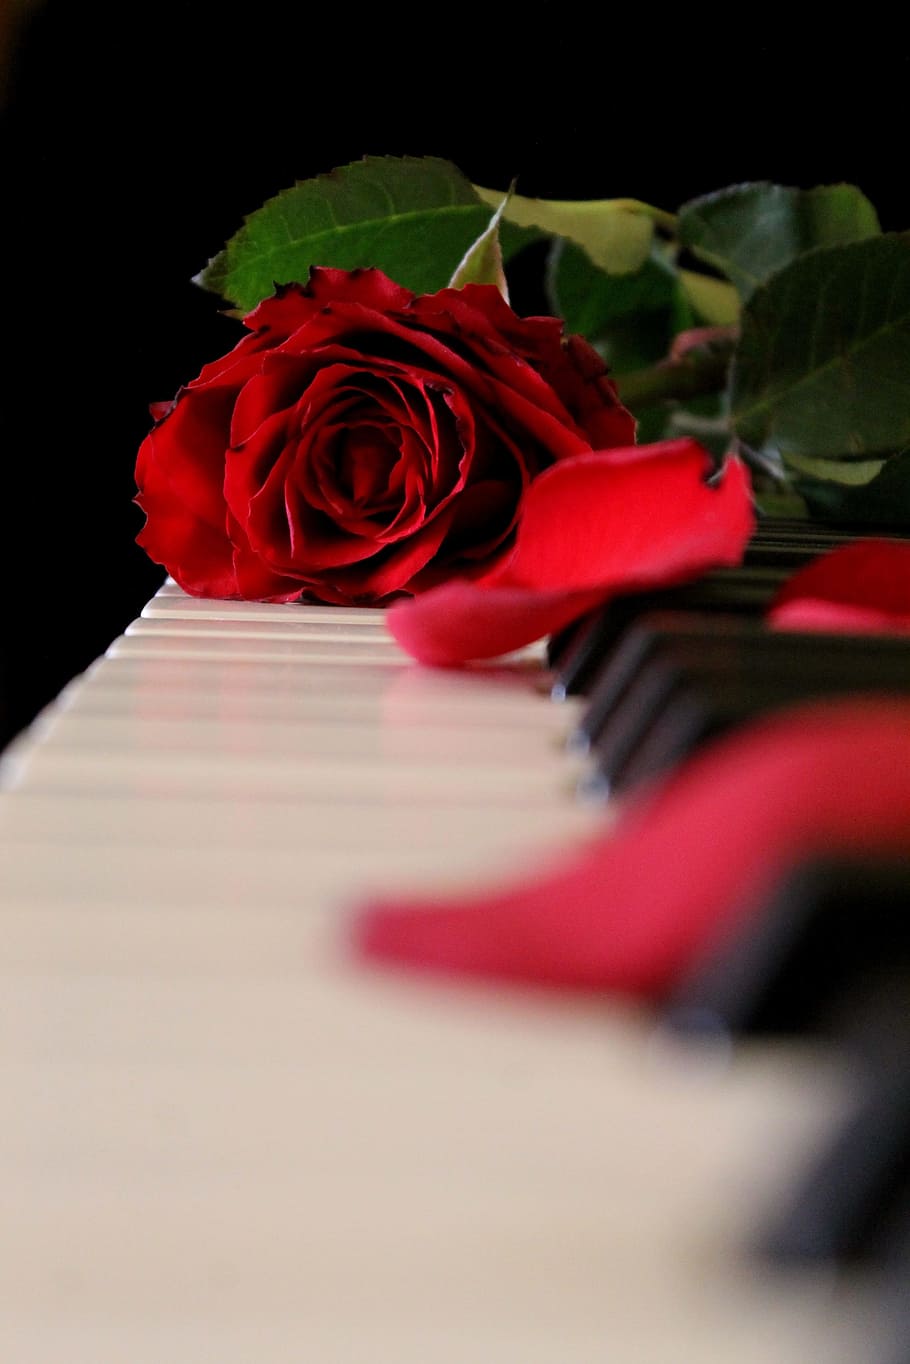 red, rose, piano keyboard, piano, music, flower, flowering plant, beauty in nature, rose - flower, petal